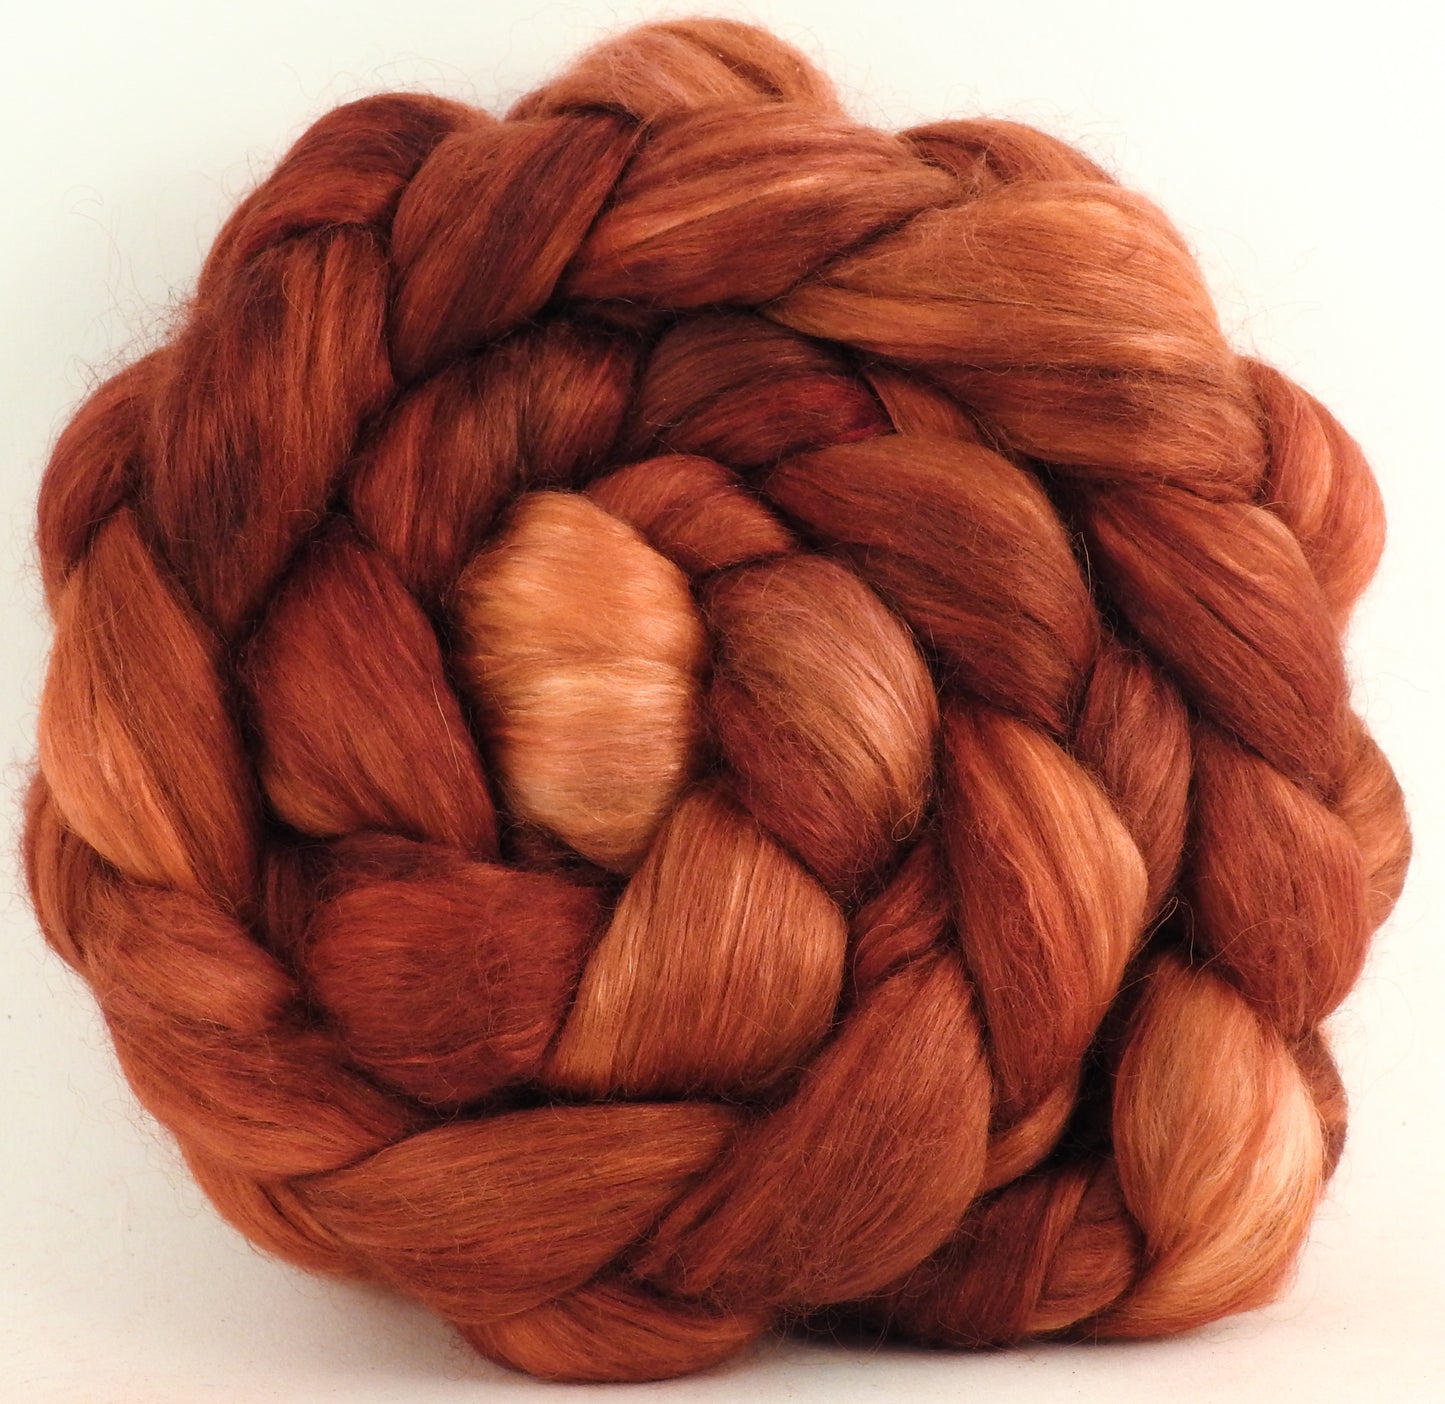 Russet (5.5 oz)-Hand-dyed wensleydale/ mulberry silk roving (65/35)